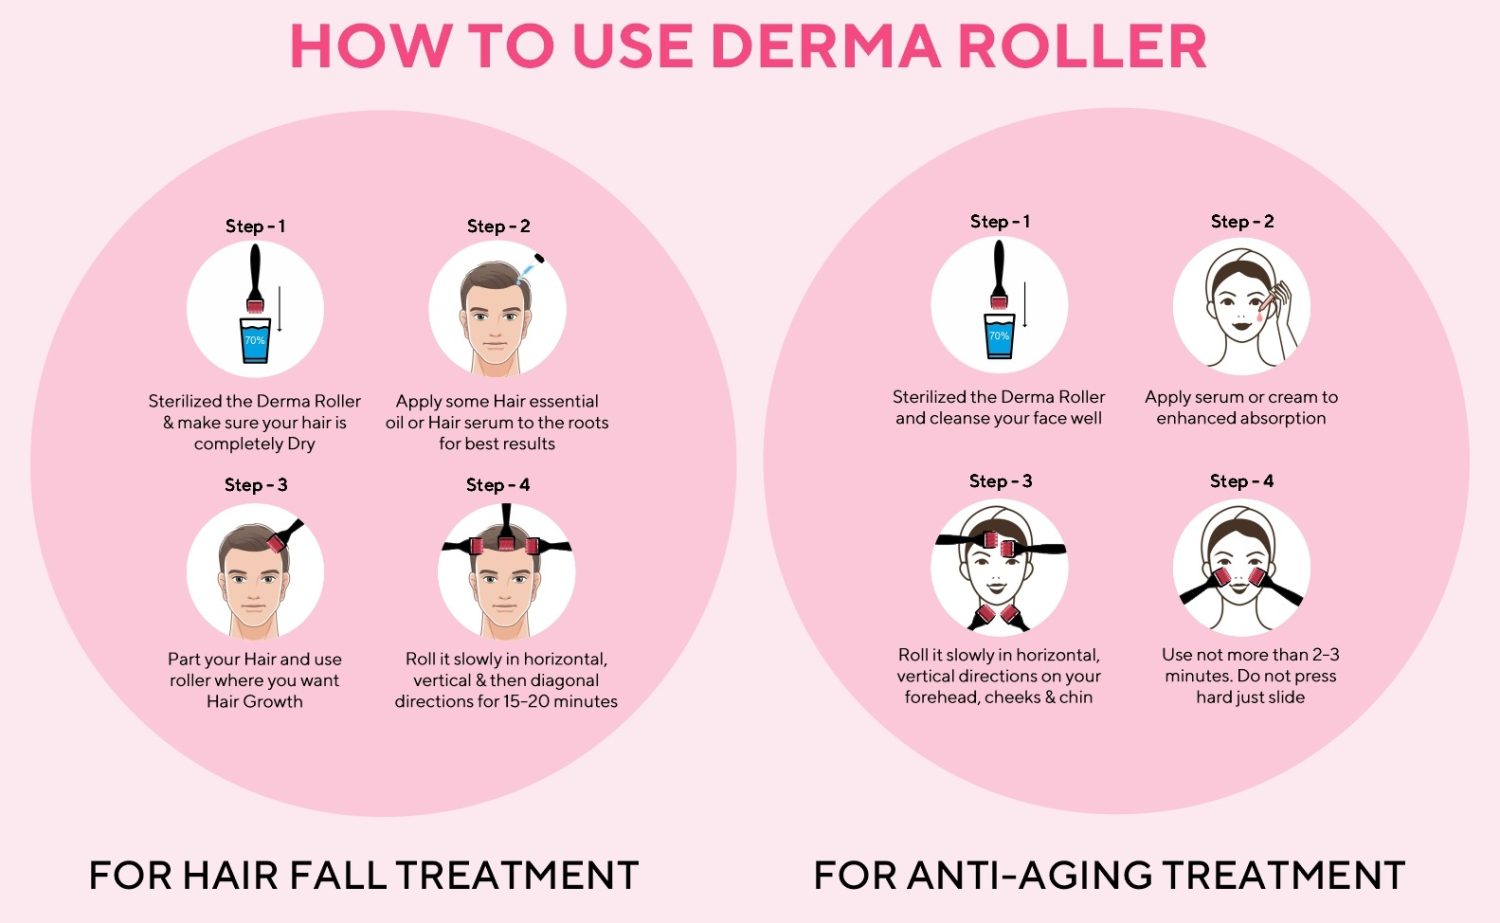 How to use Derma Roller